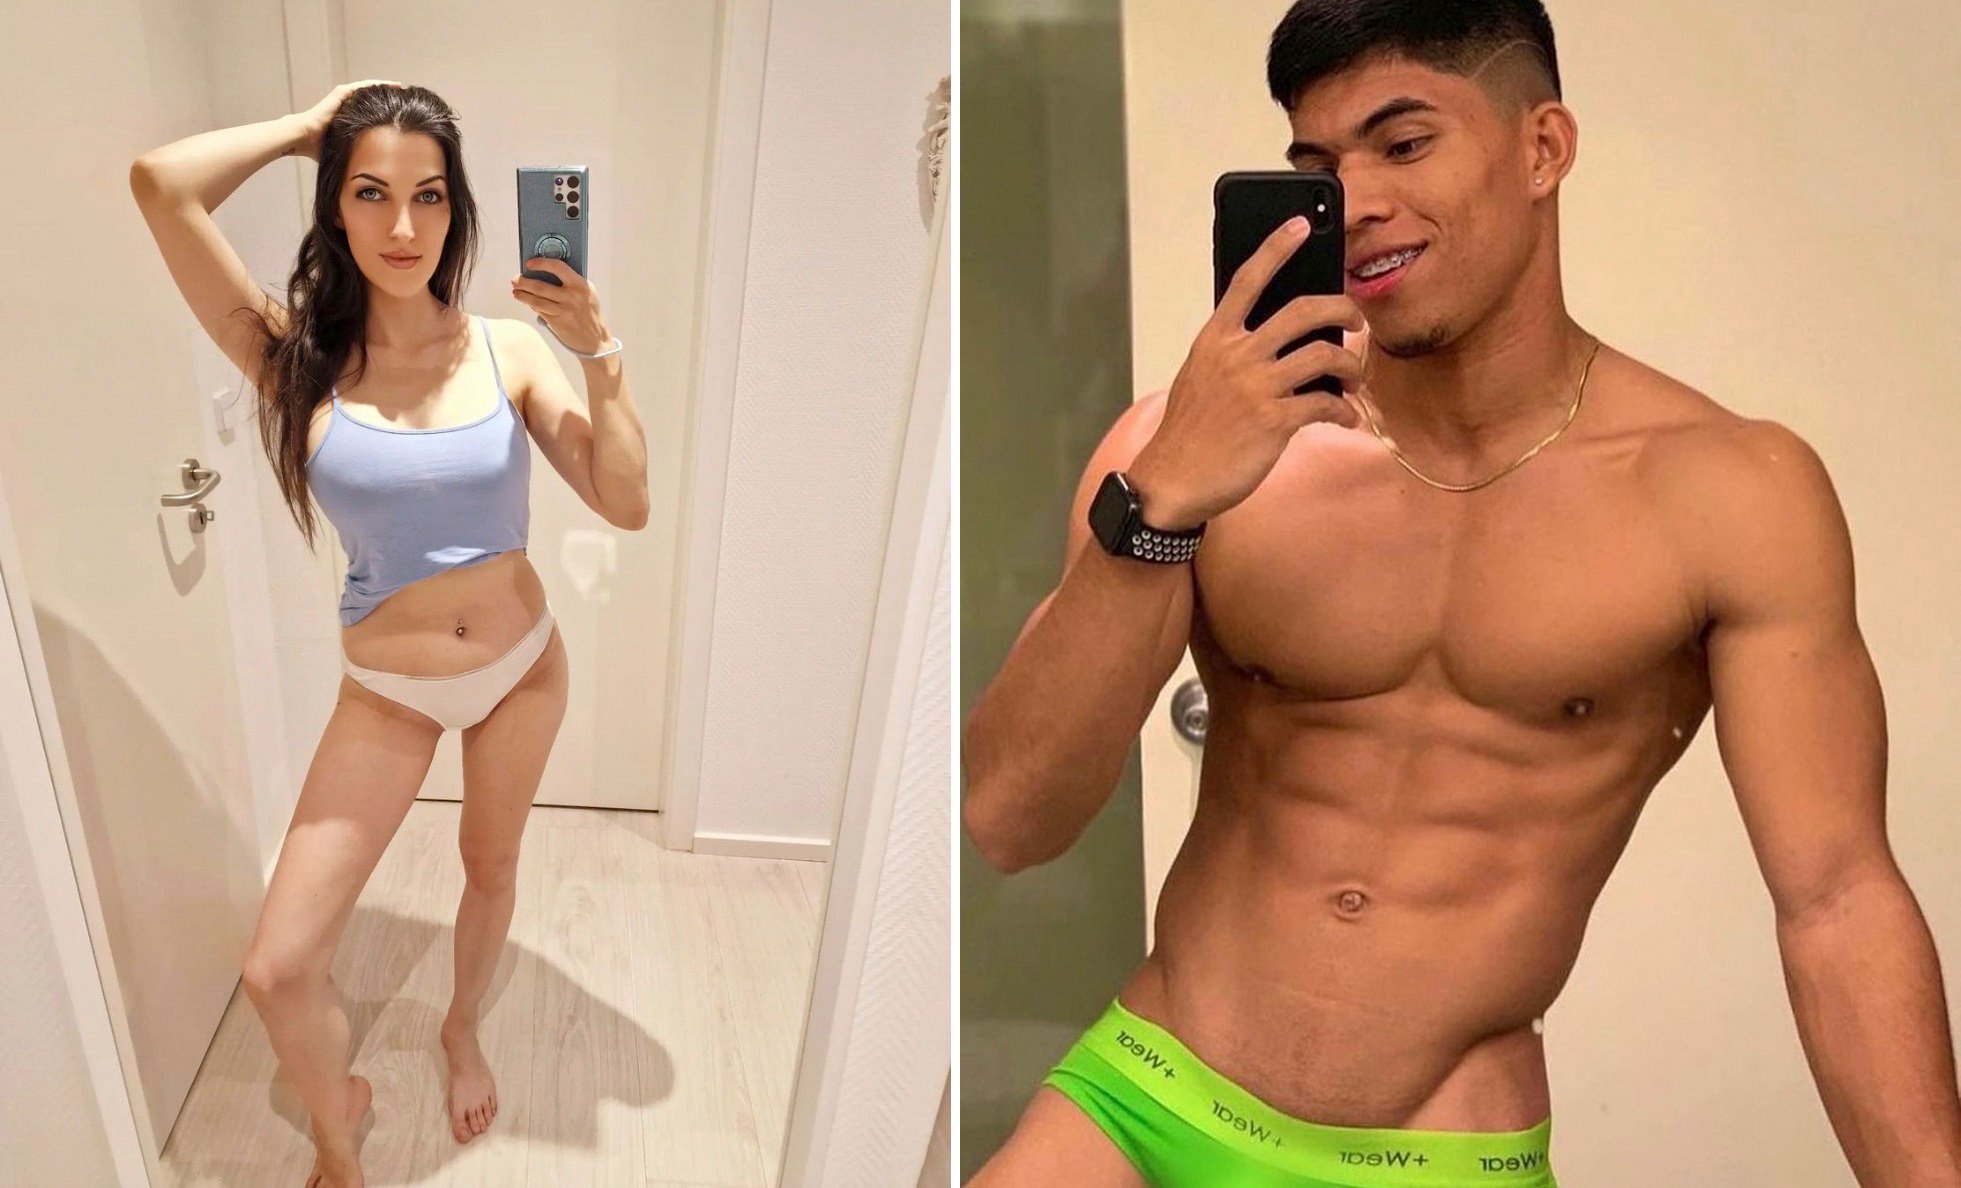 Many people take pictures of themselves when they look or feel seductive or sexy. Are they empowering or do they make them seem desperate? Photo: Instagram